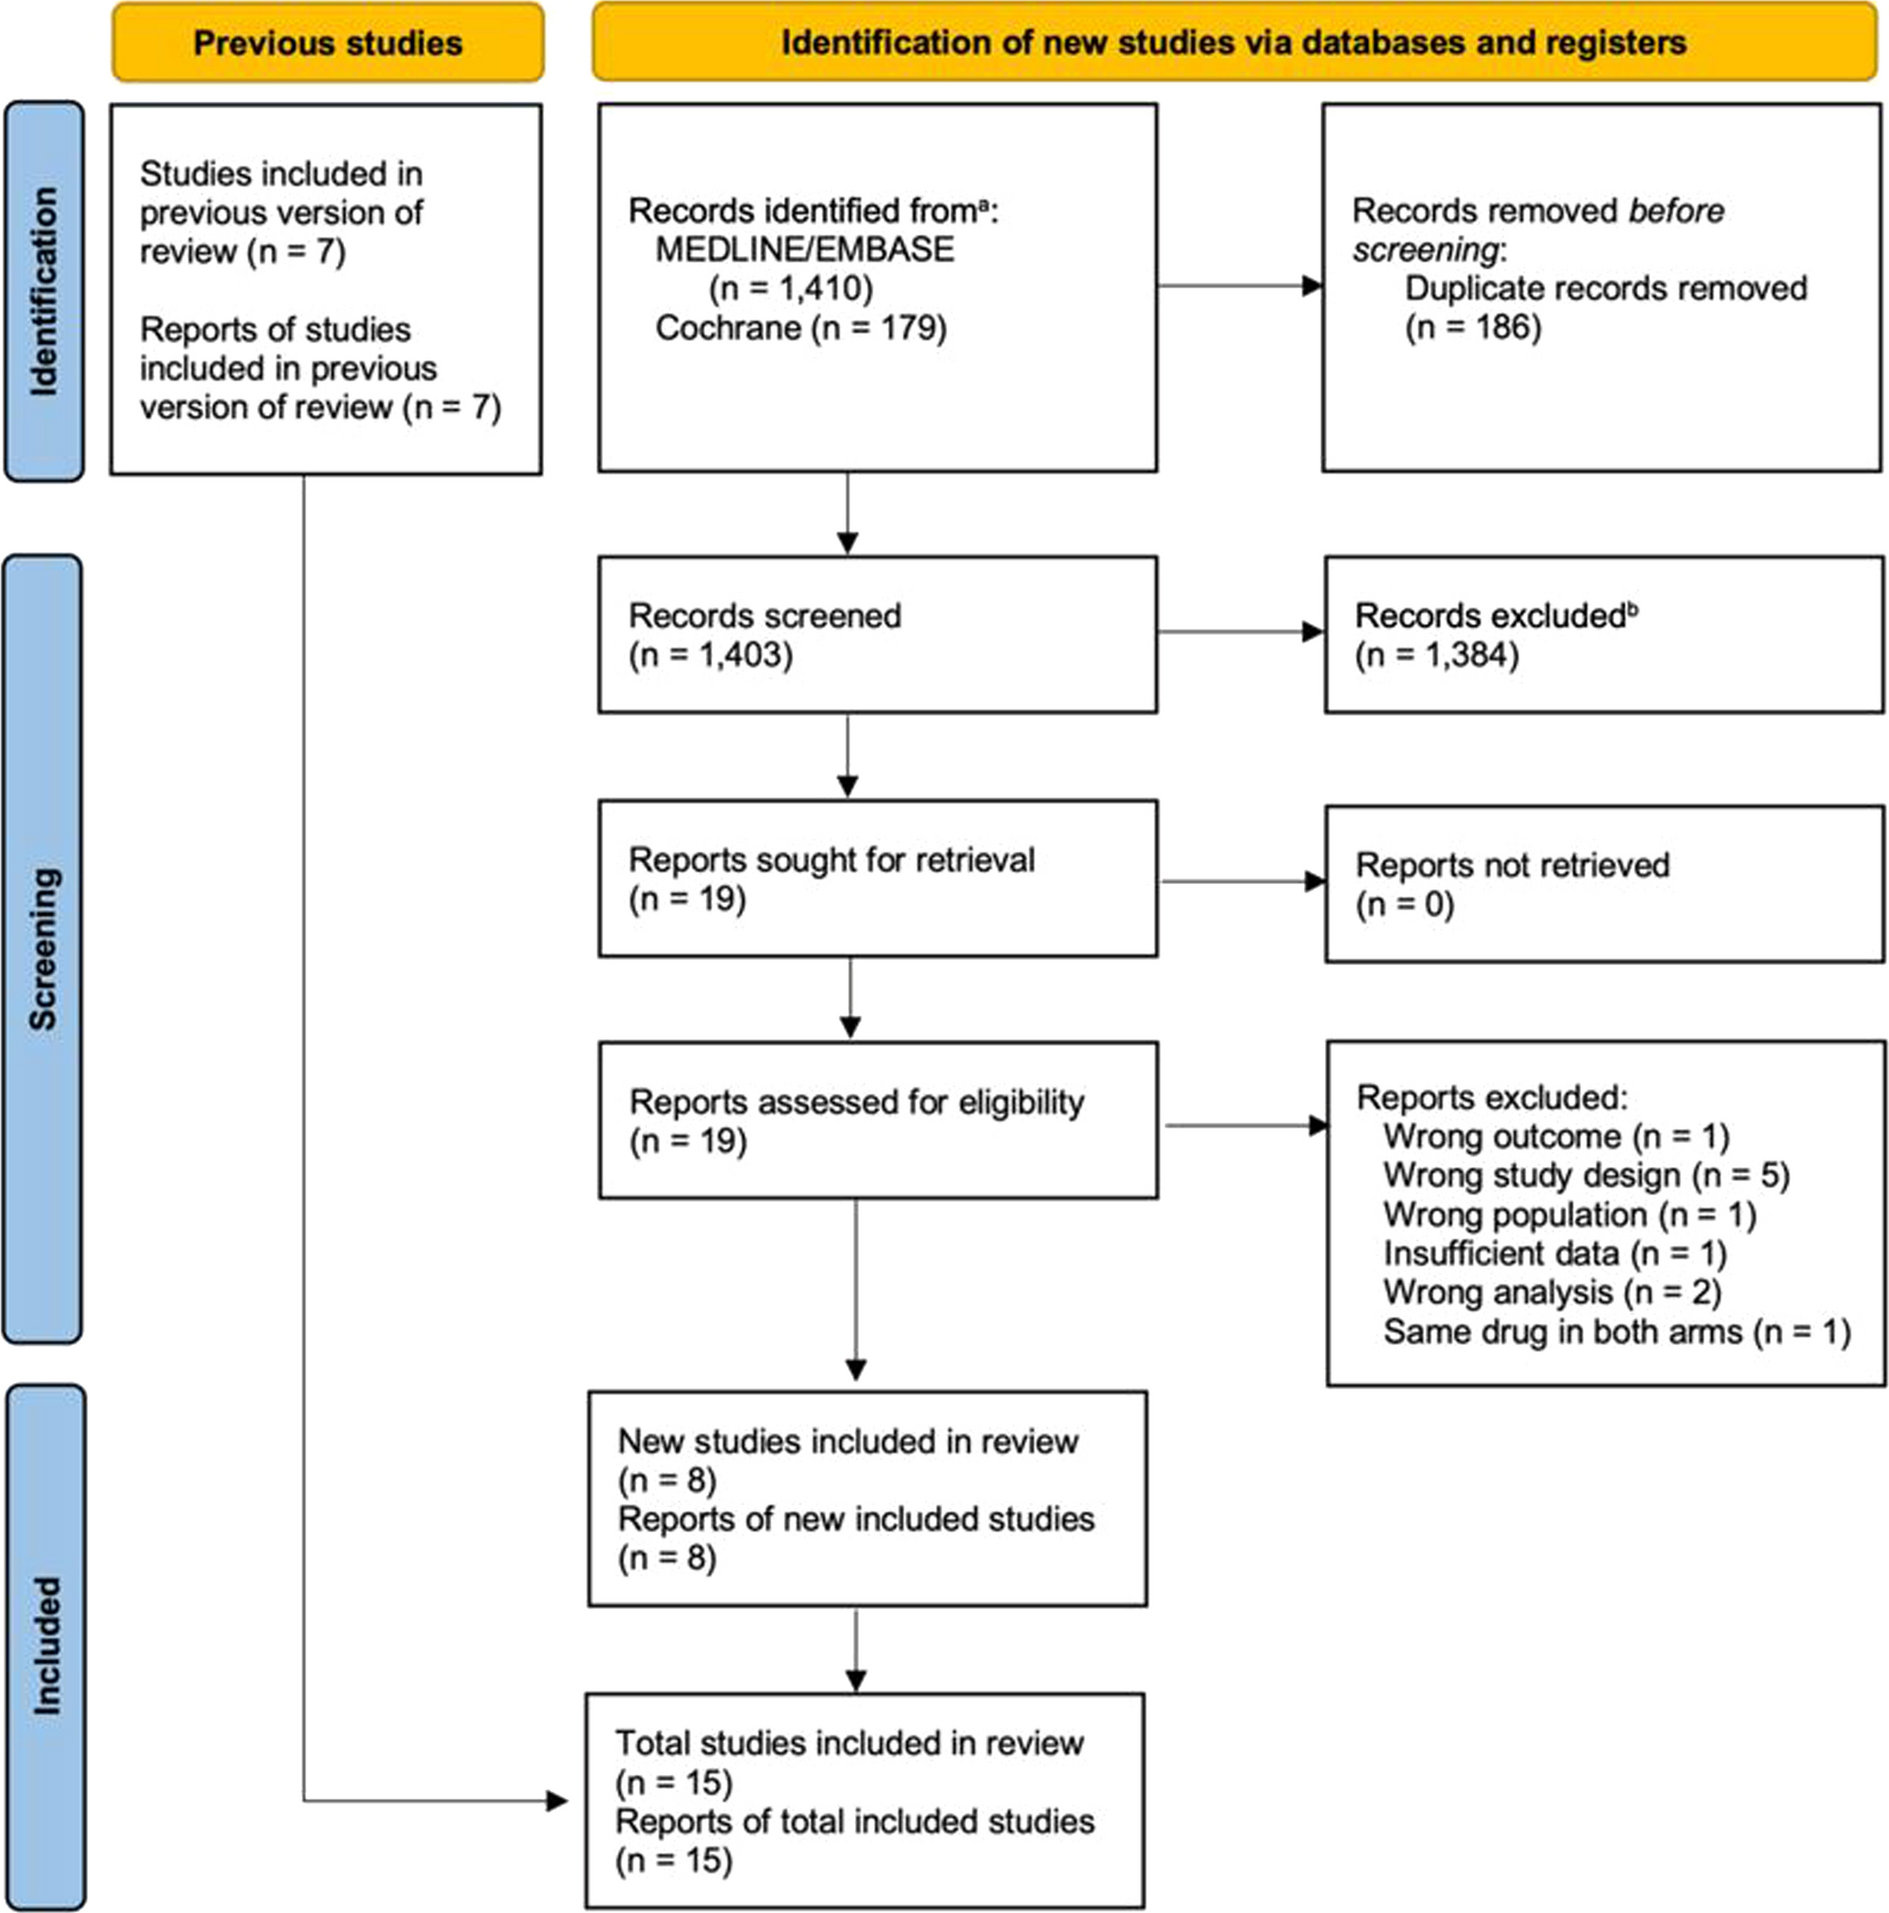 Selective Internal Radiation Therapy Using Y-90 Resin Microspheres for Metastatic Colorectal Cancer: An Updated Systematic Review and Network Meta-Analysis